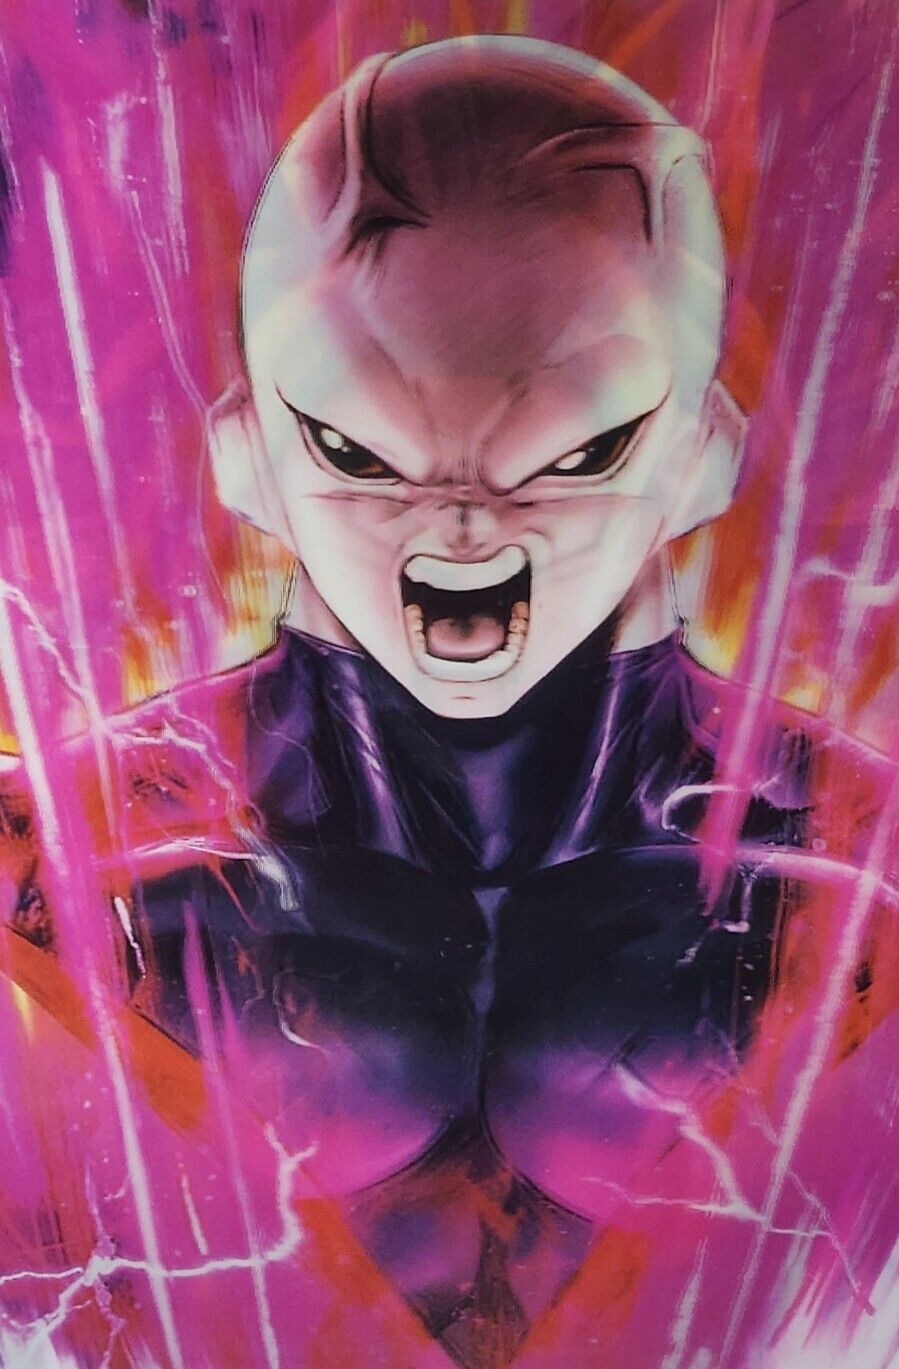 3D Holographic Lenticular Poster 2-in-1, JIREN, and LSSJ BROLY 🔥 🔥 🐉 